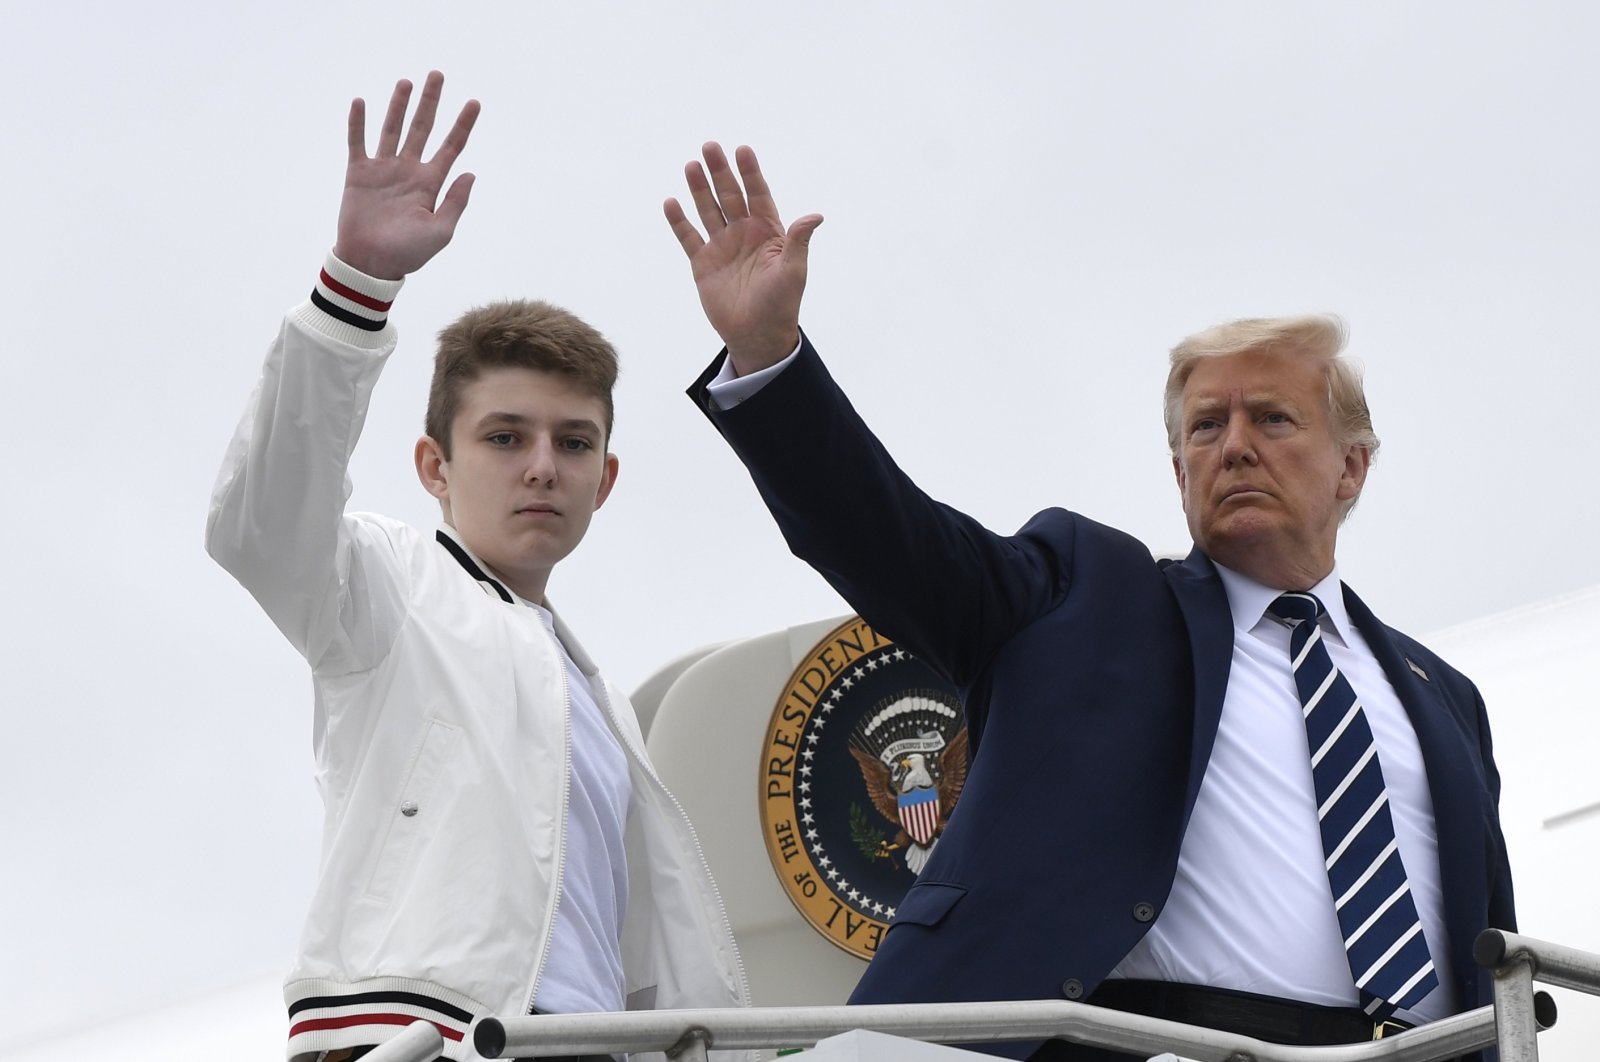 President Donald Trump (R), and his son Barron Trump wave from the top of the steps to Air Force One at Morristown Municipal Airport in Morristown, N.J, Aug. 16, 2020. (AP Photo)